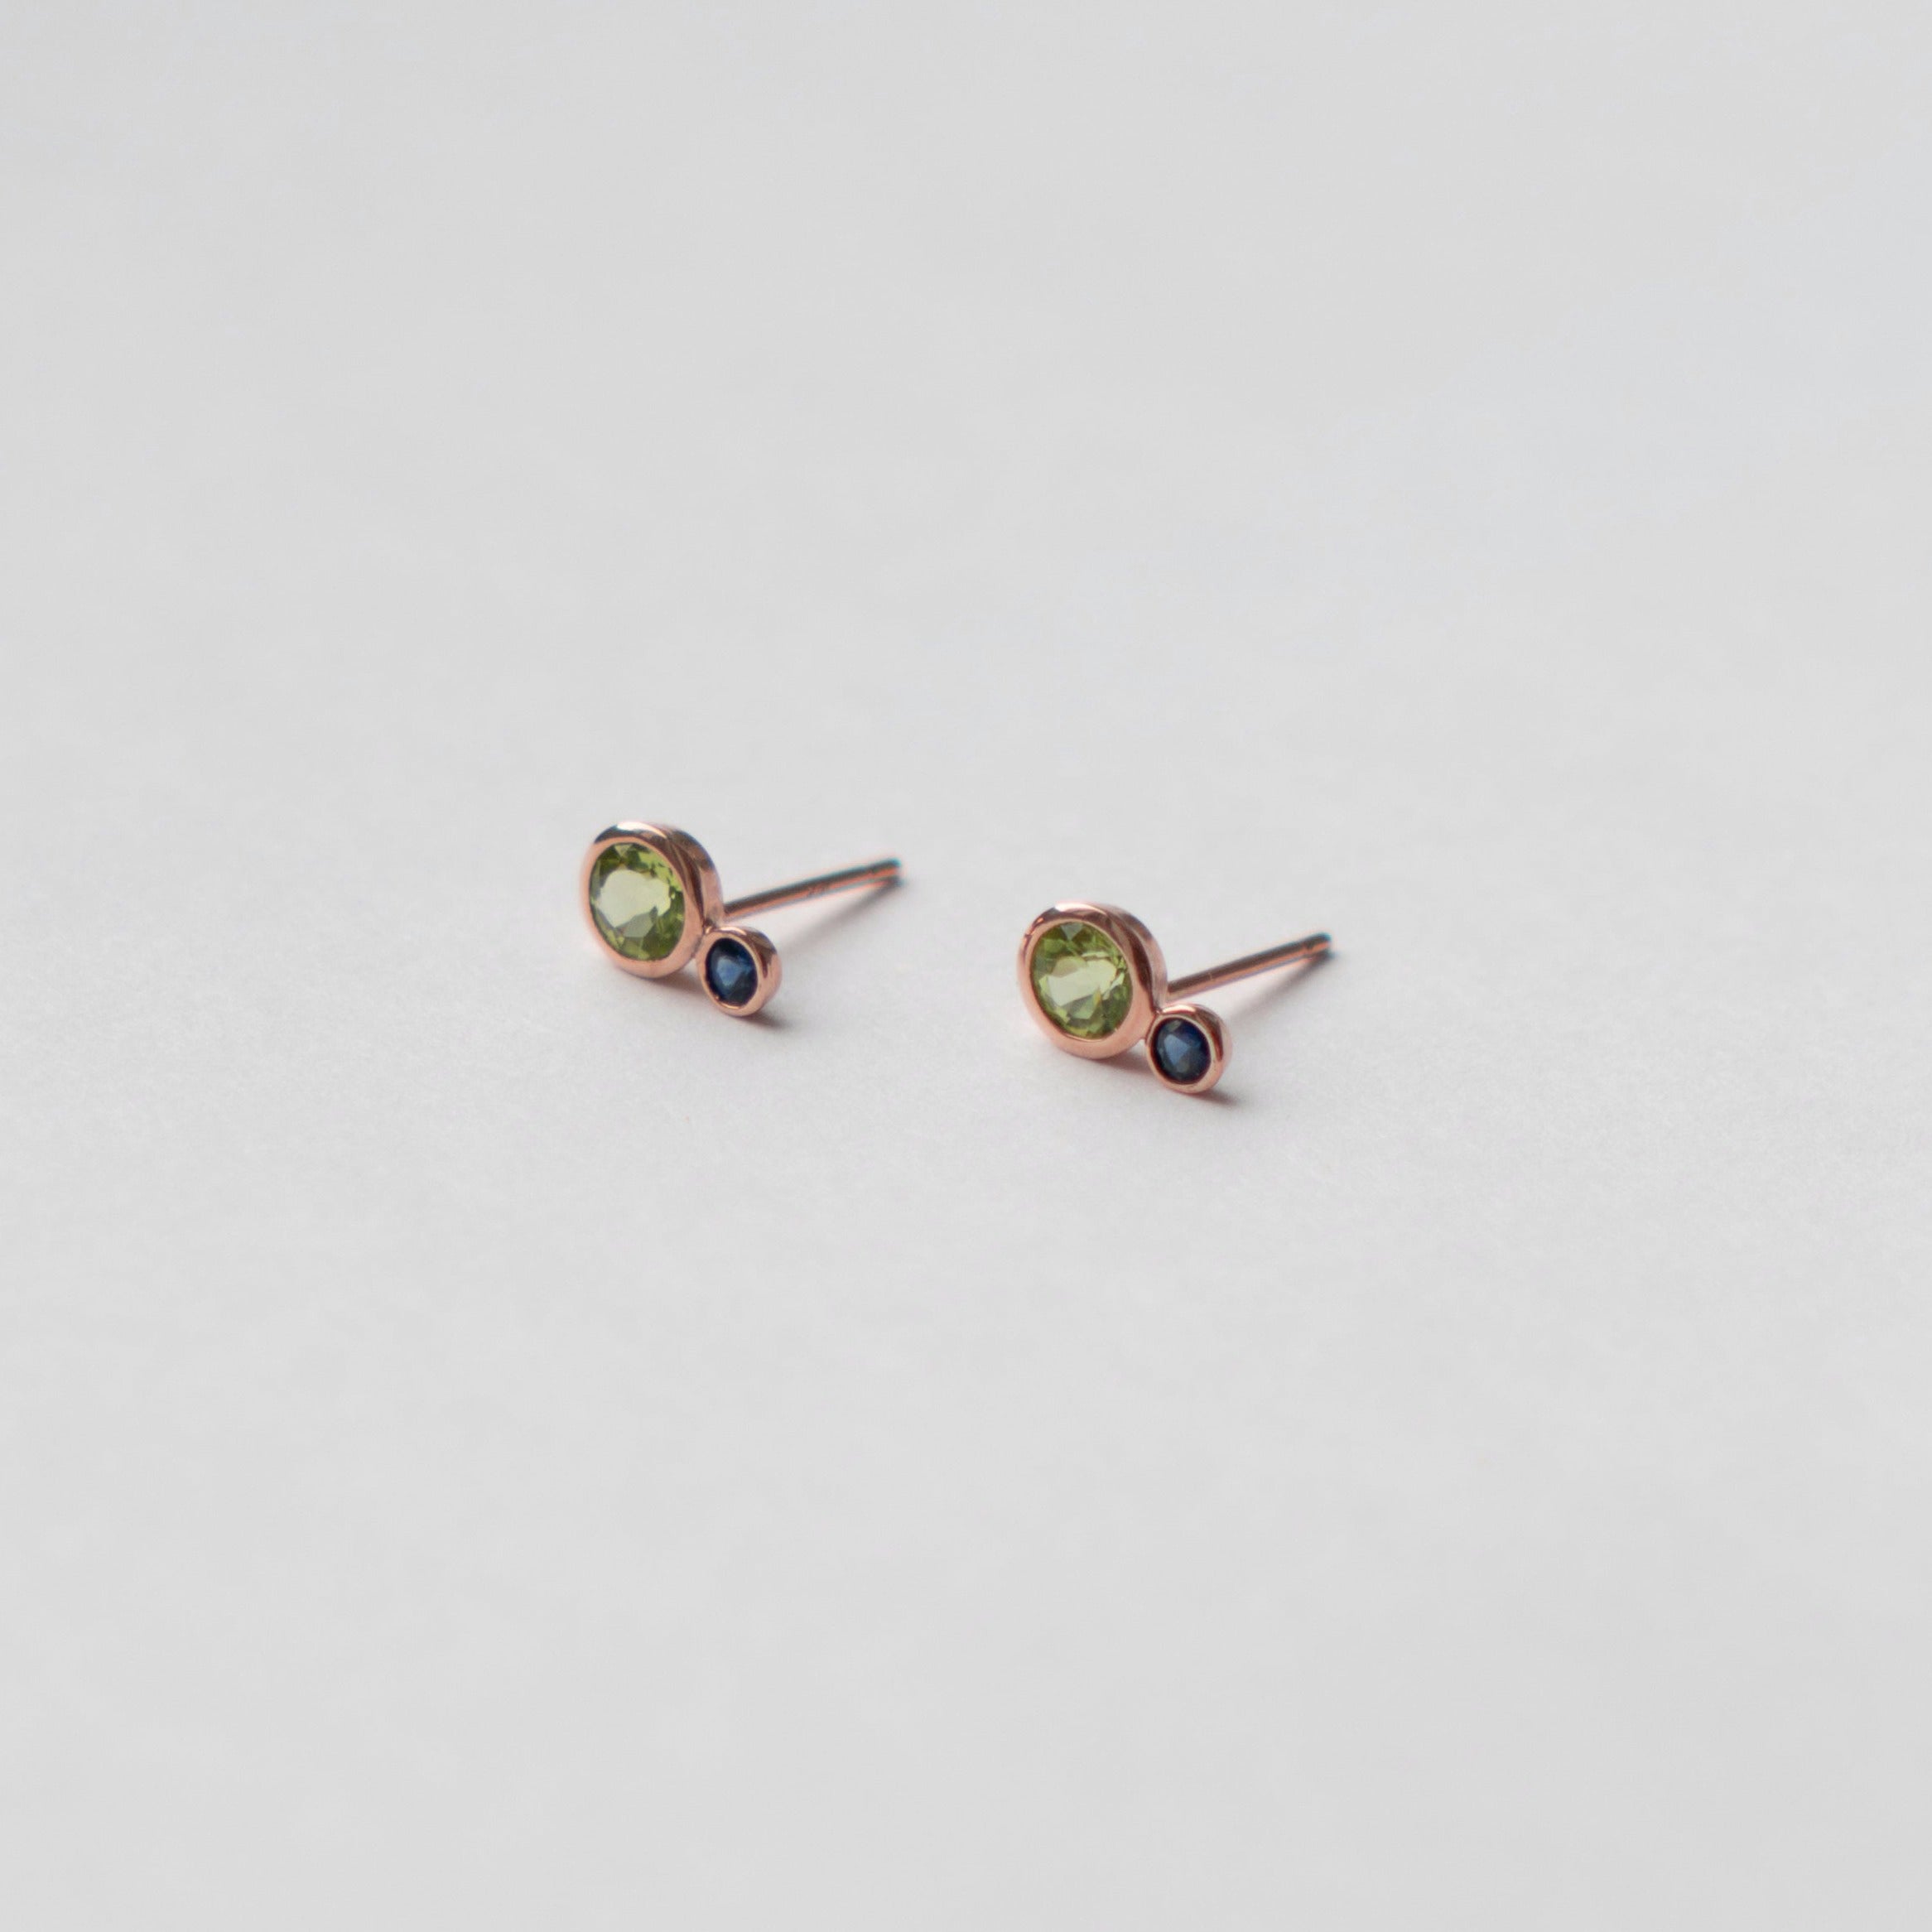 Kiki alternative stud earrings in 14k rose gold set with peridot and sapphire